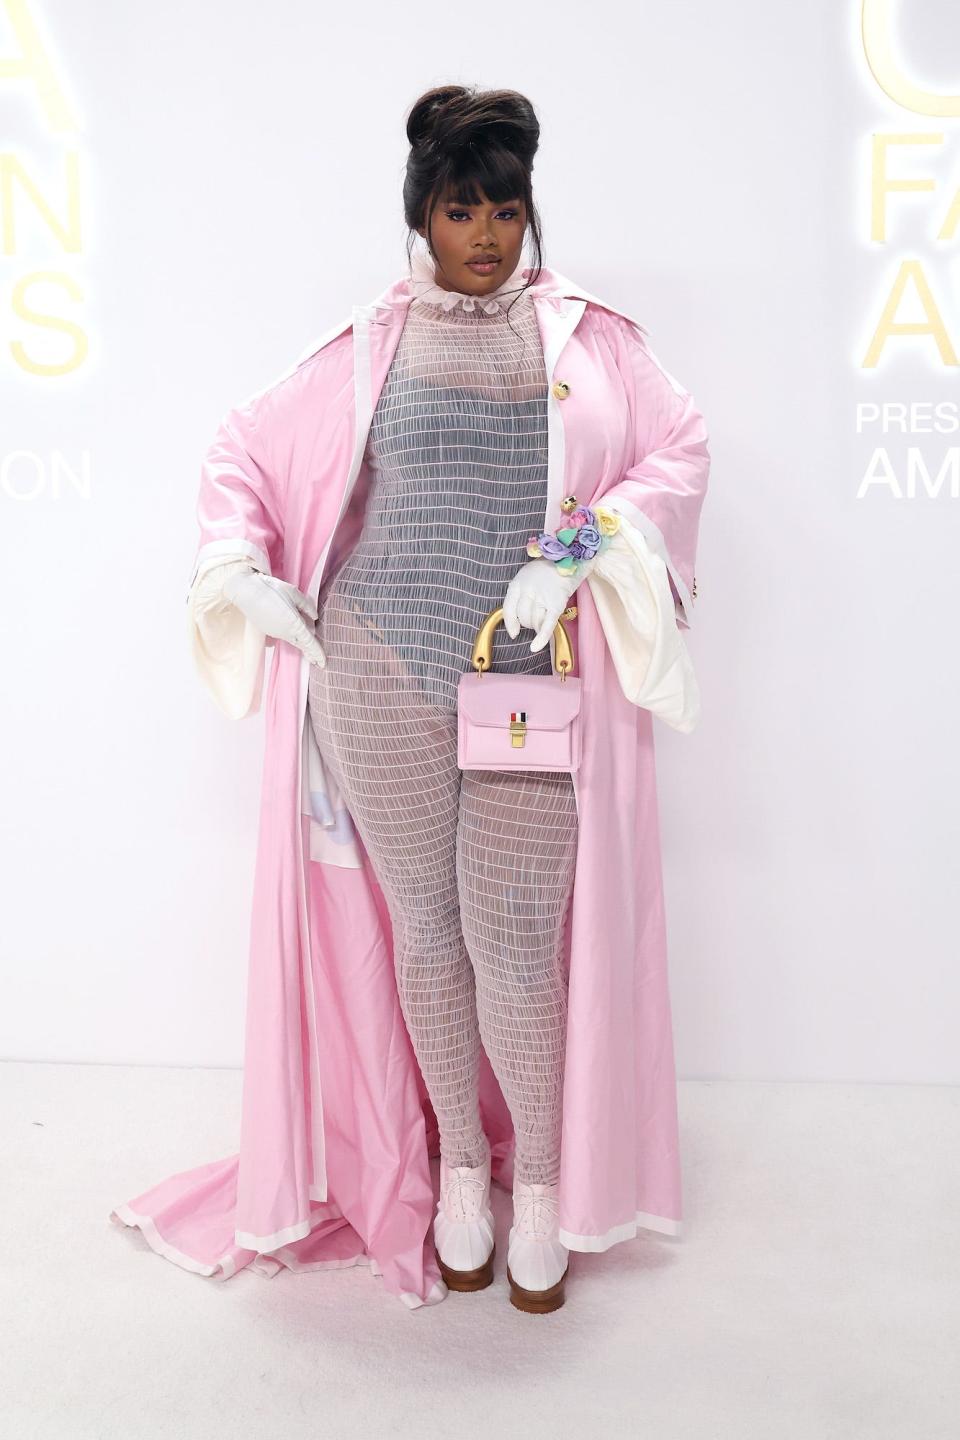 Precious Lee at the CFDA Fashion Awards in New York City on October 7, 2022.